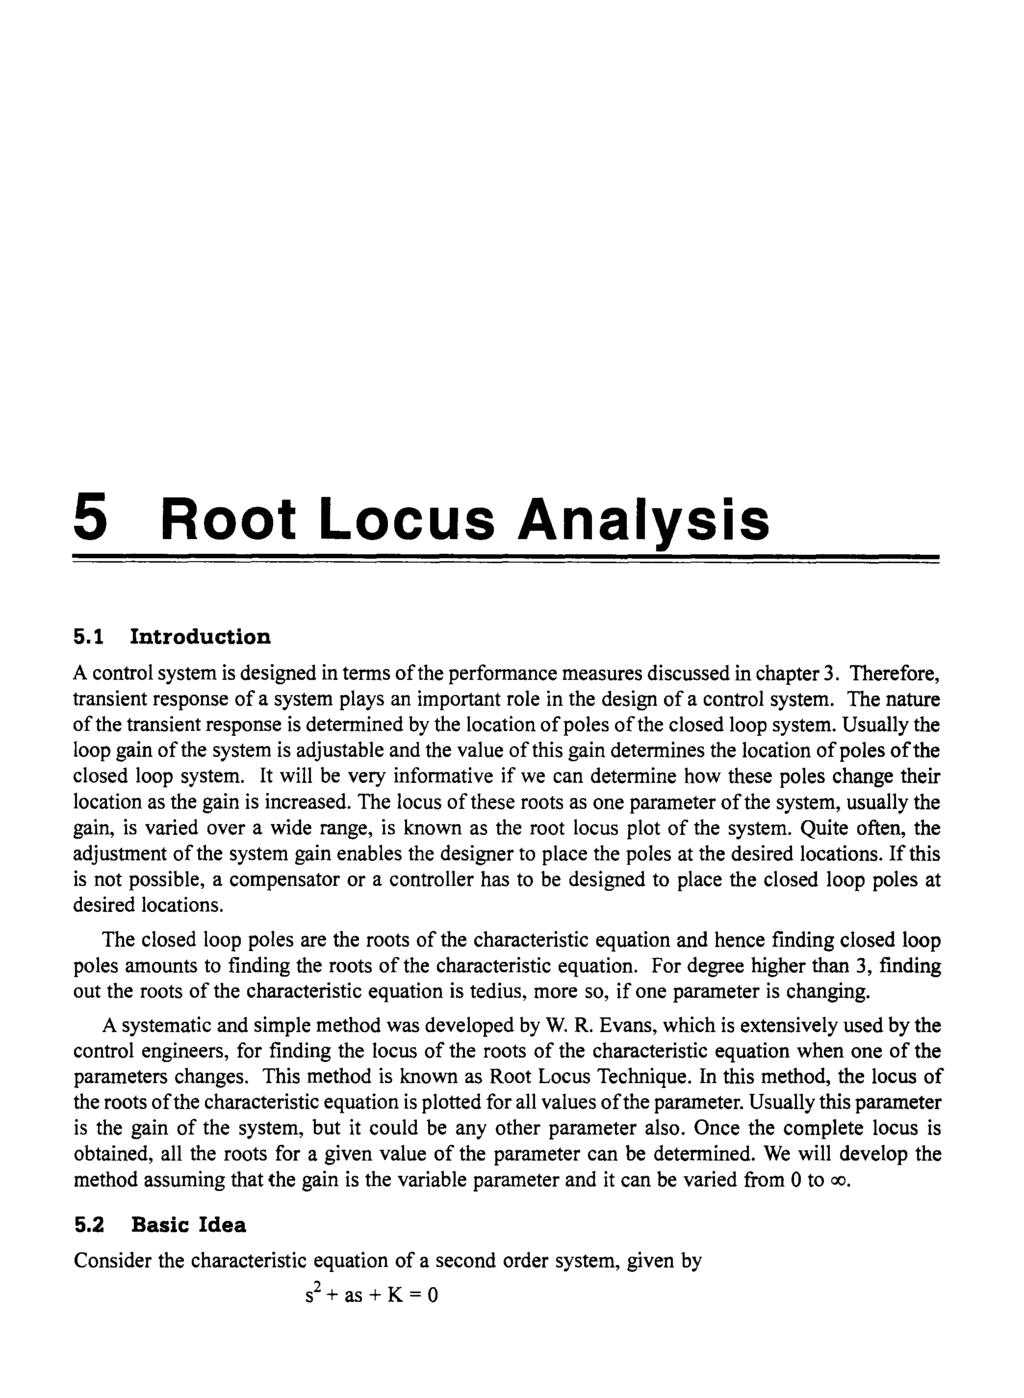 5 Root Locus Analysis 5.1 Introduction A control system is designed in tenns of the perfonnance measures discussed in chapter 3.